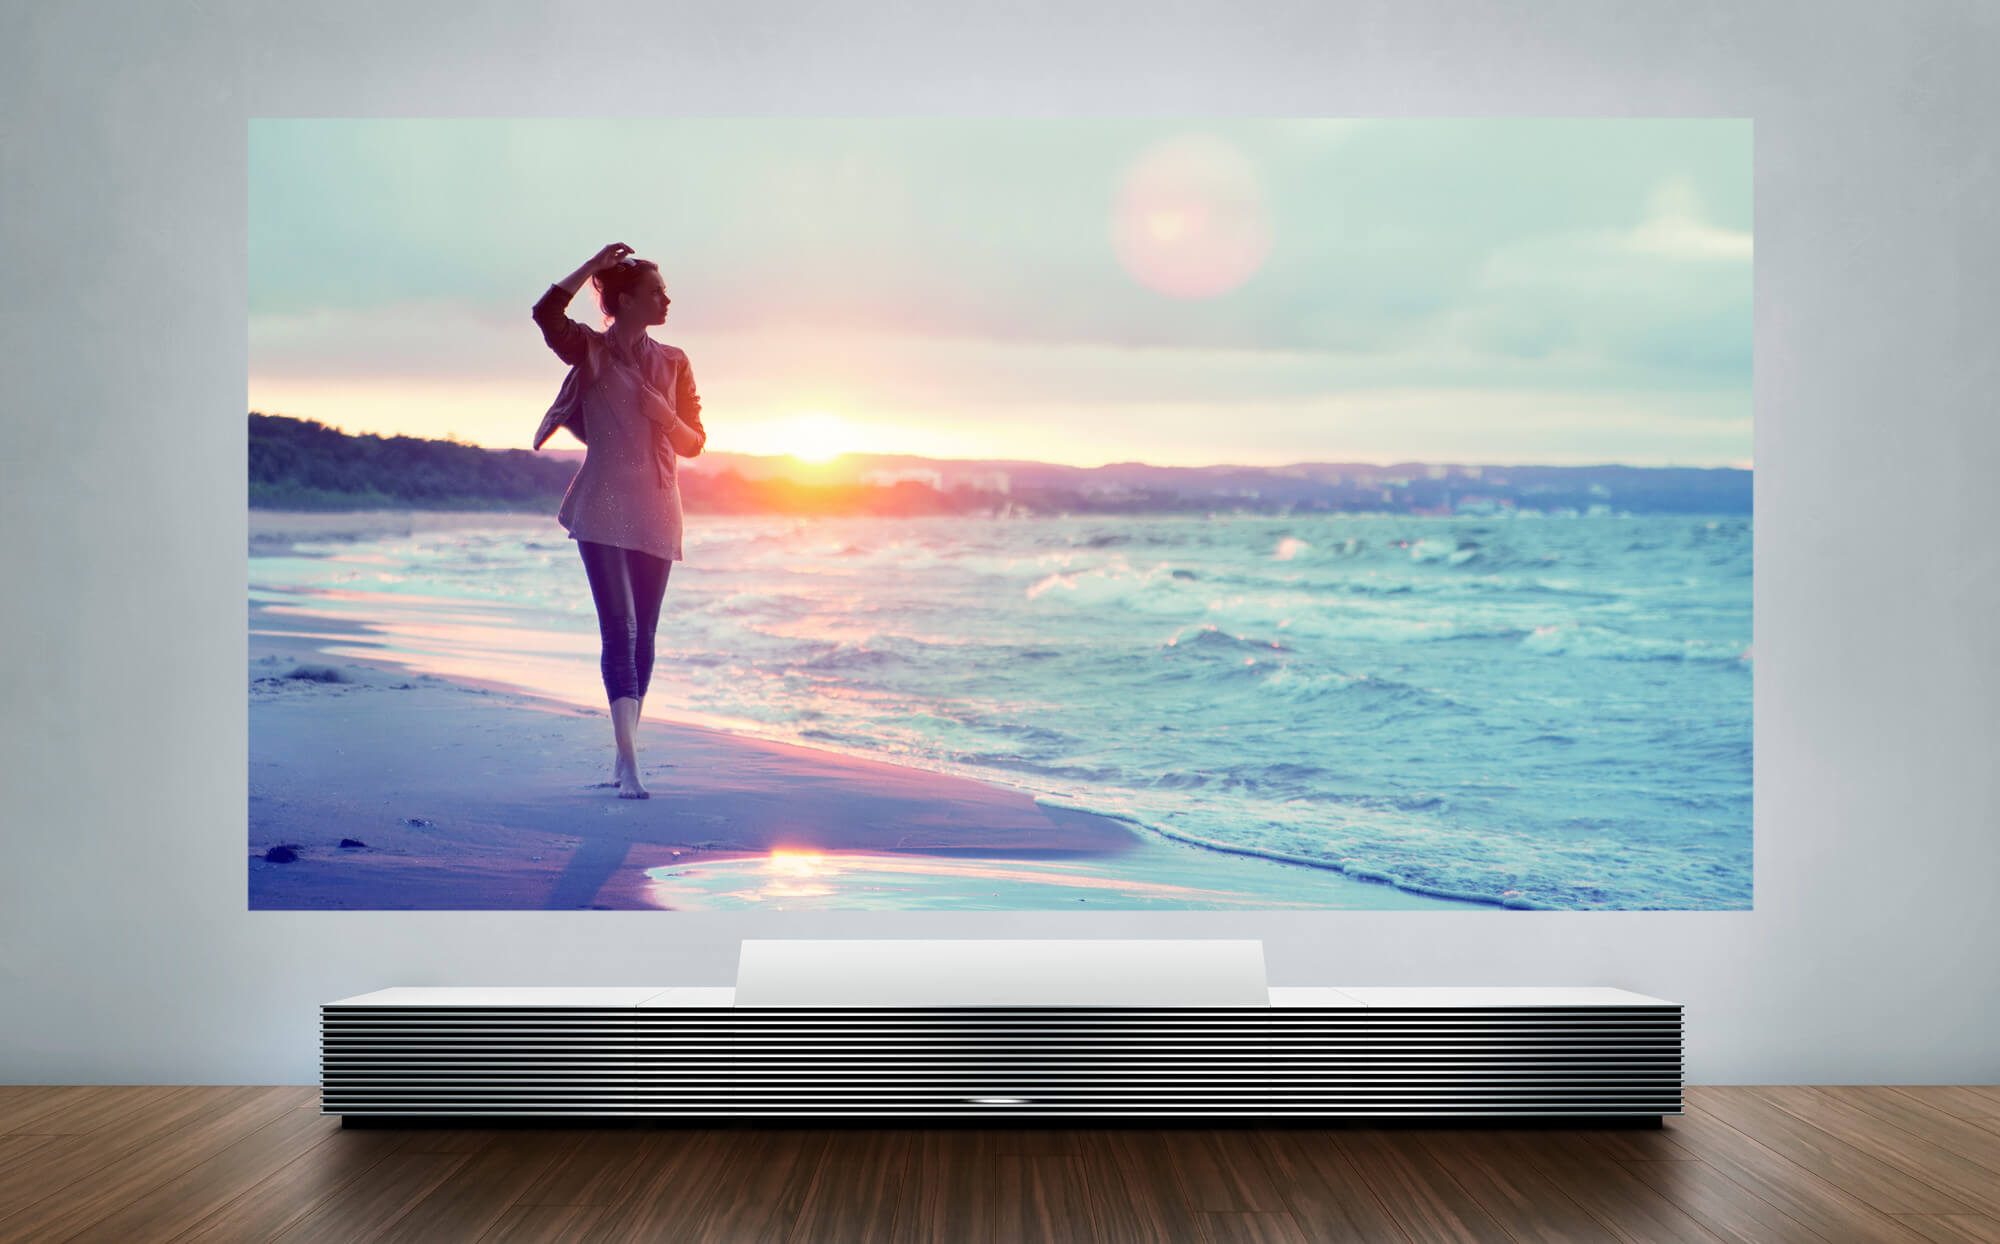 Sony Launches Its Cutting-Edge 4K Ultra Short Throw Projector